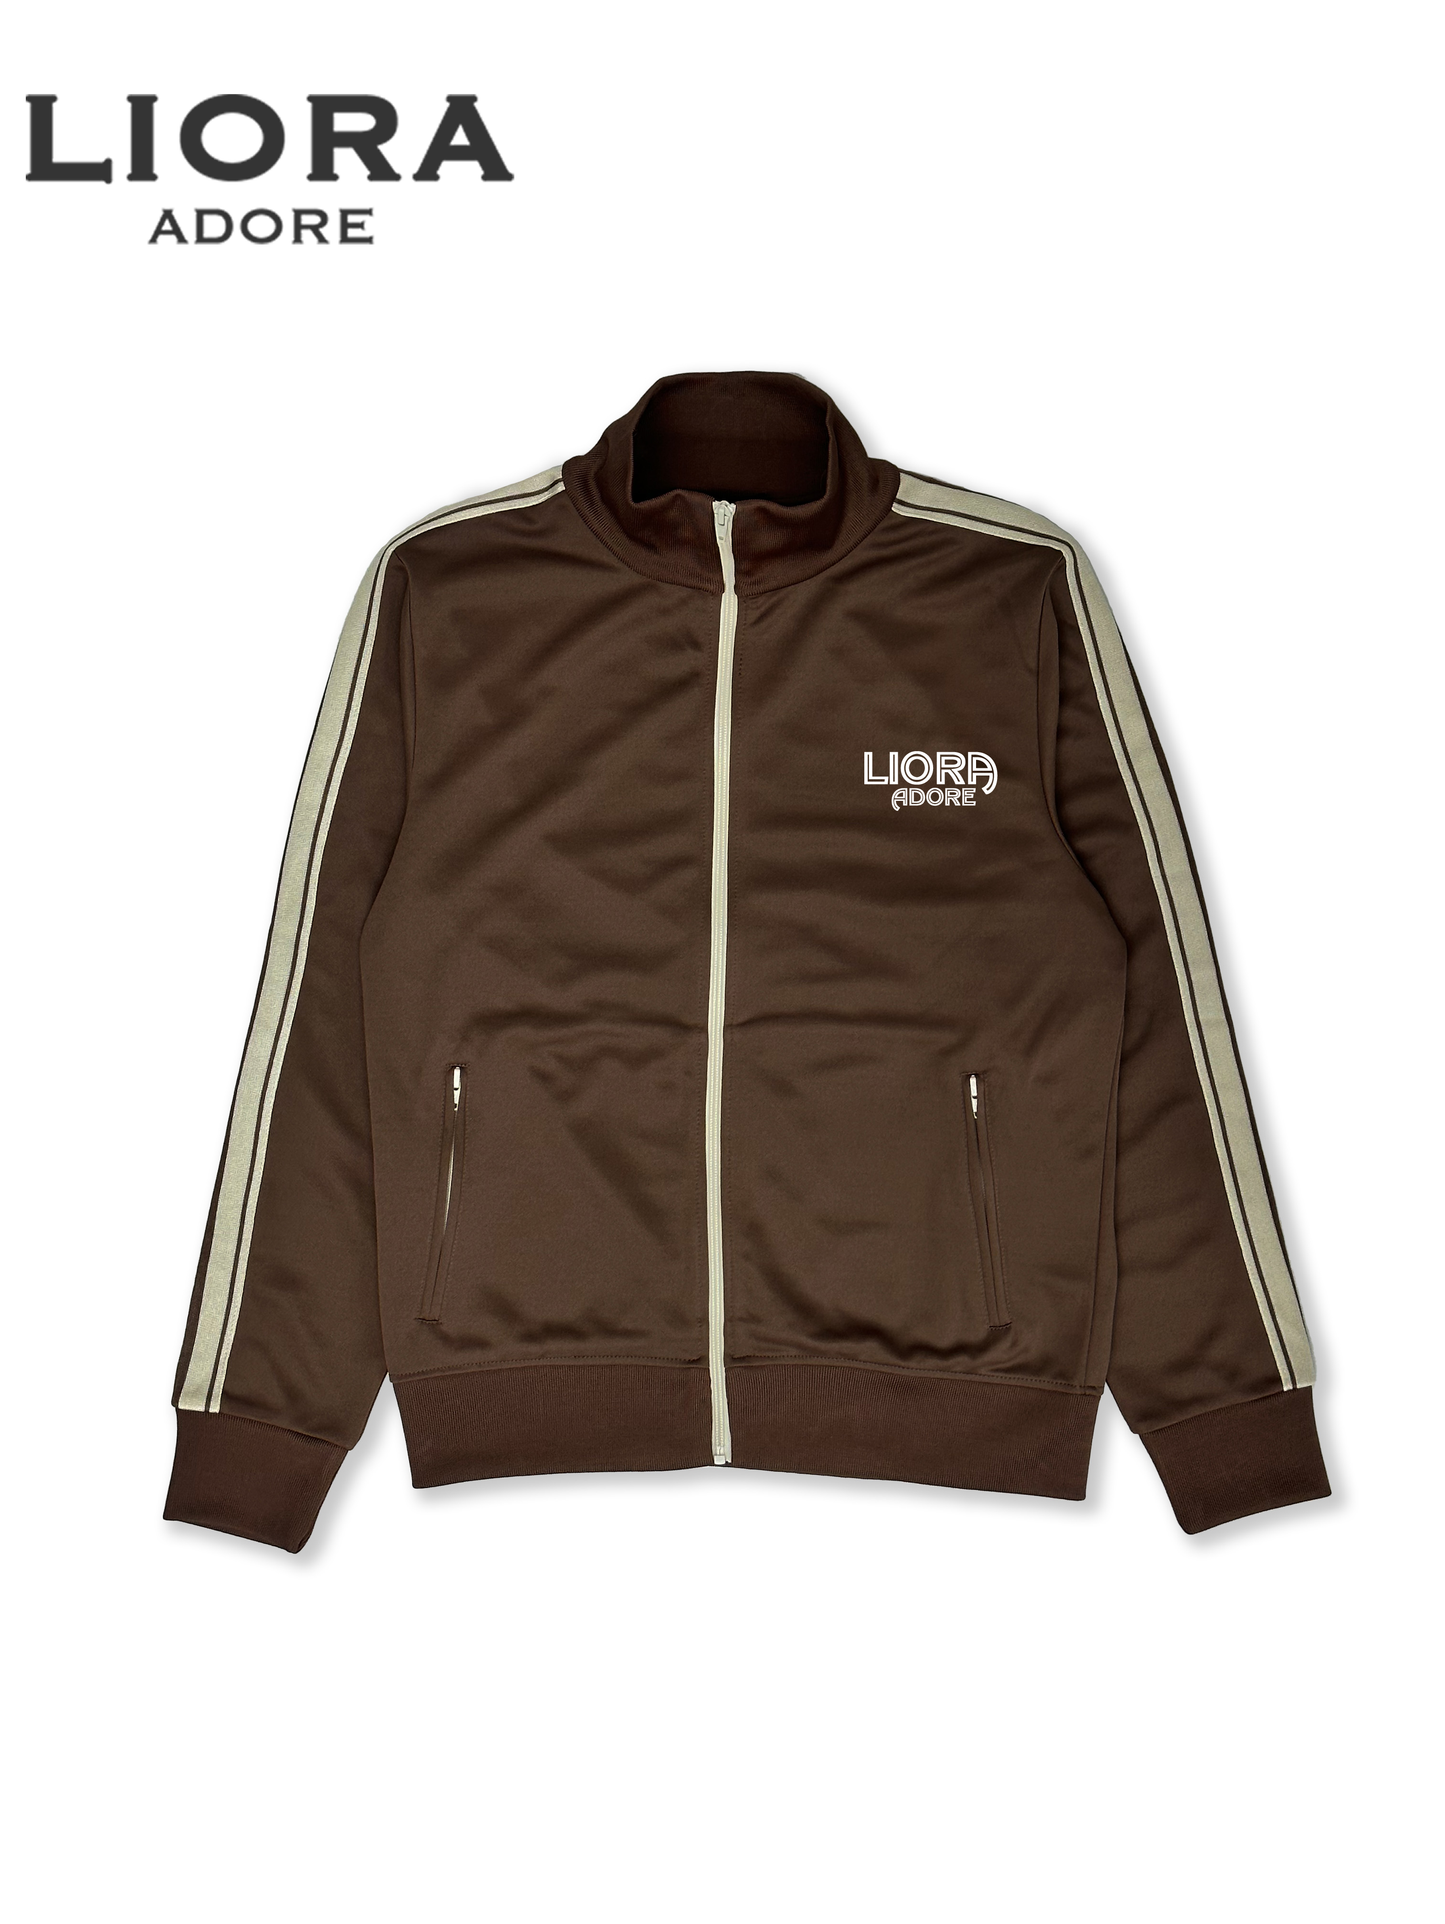 ALL-STAR LIORA ADORE TRACK JACKET